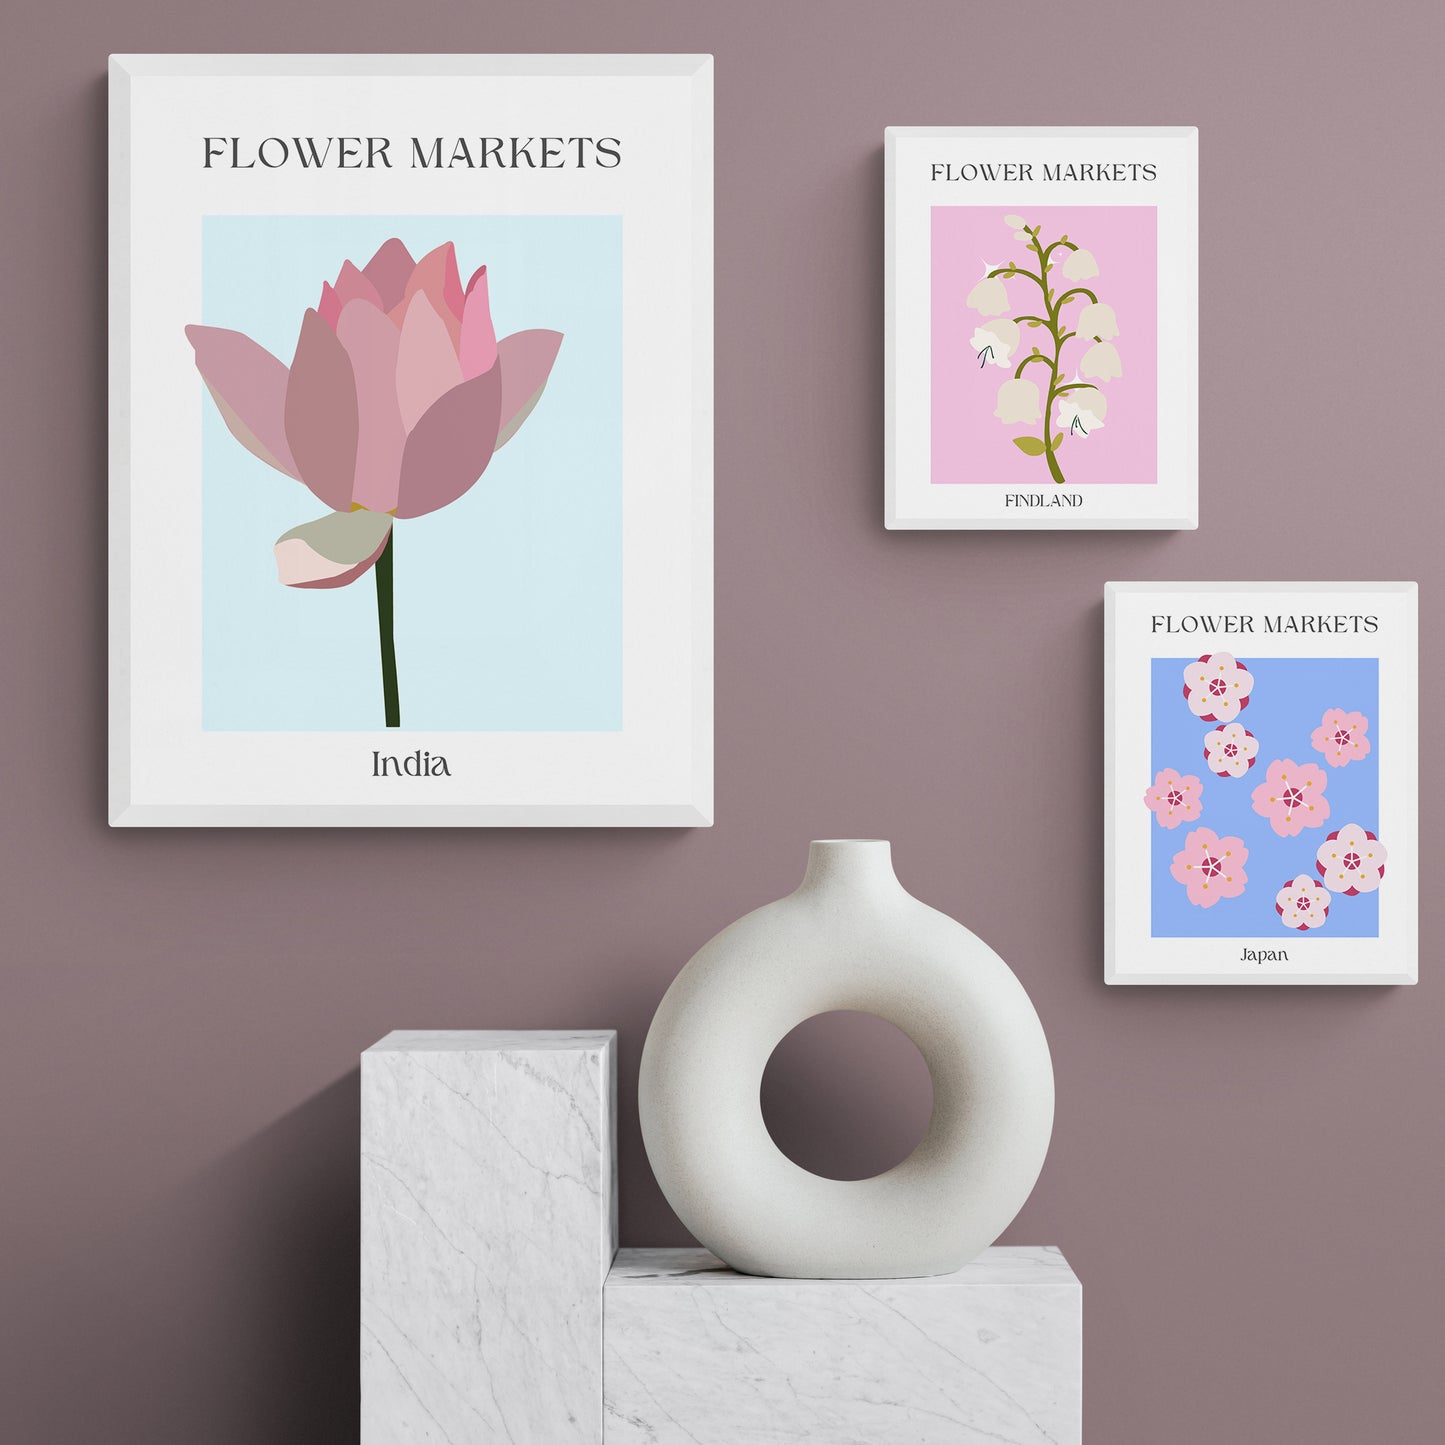 This beautiful Sweden Flowers Market Print is a stunning wall décor piece that is sure to make a statement. Featuring a poster made with shapes, formes and art inspired by Matisse, this poster is a great source of gallery wall inspiration that will bring vibrancy to your home. The Danish pastel colors make it the perfect addition to any room.